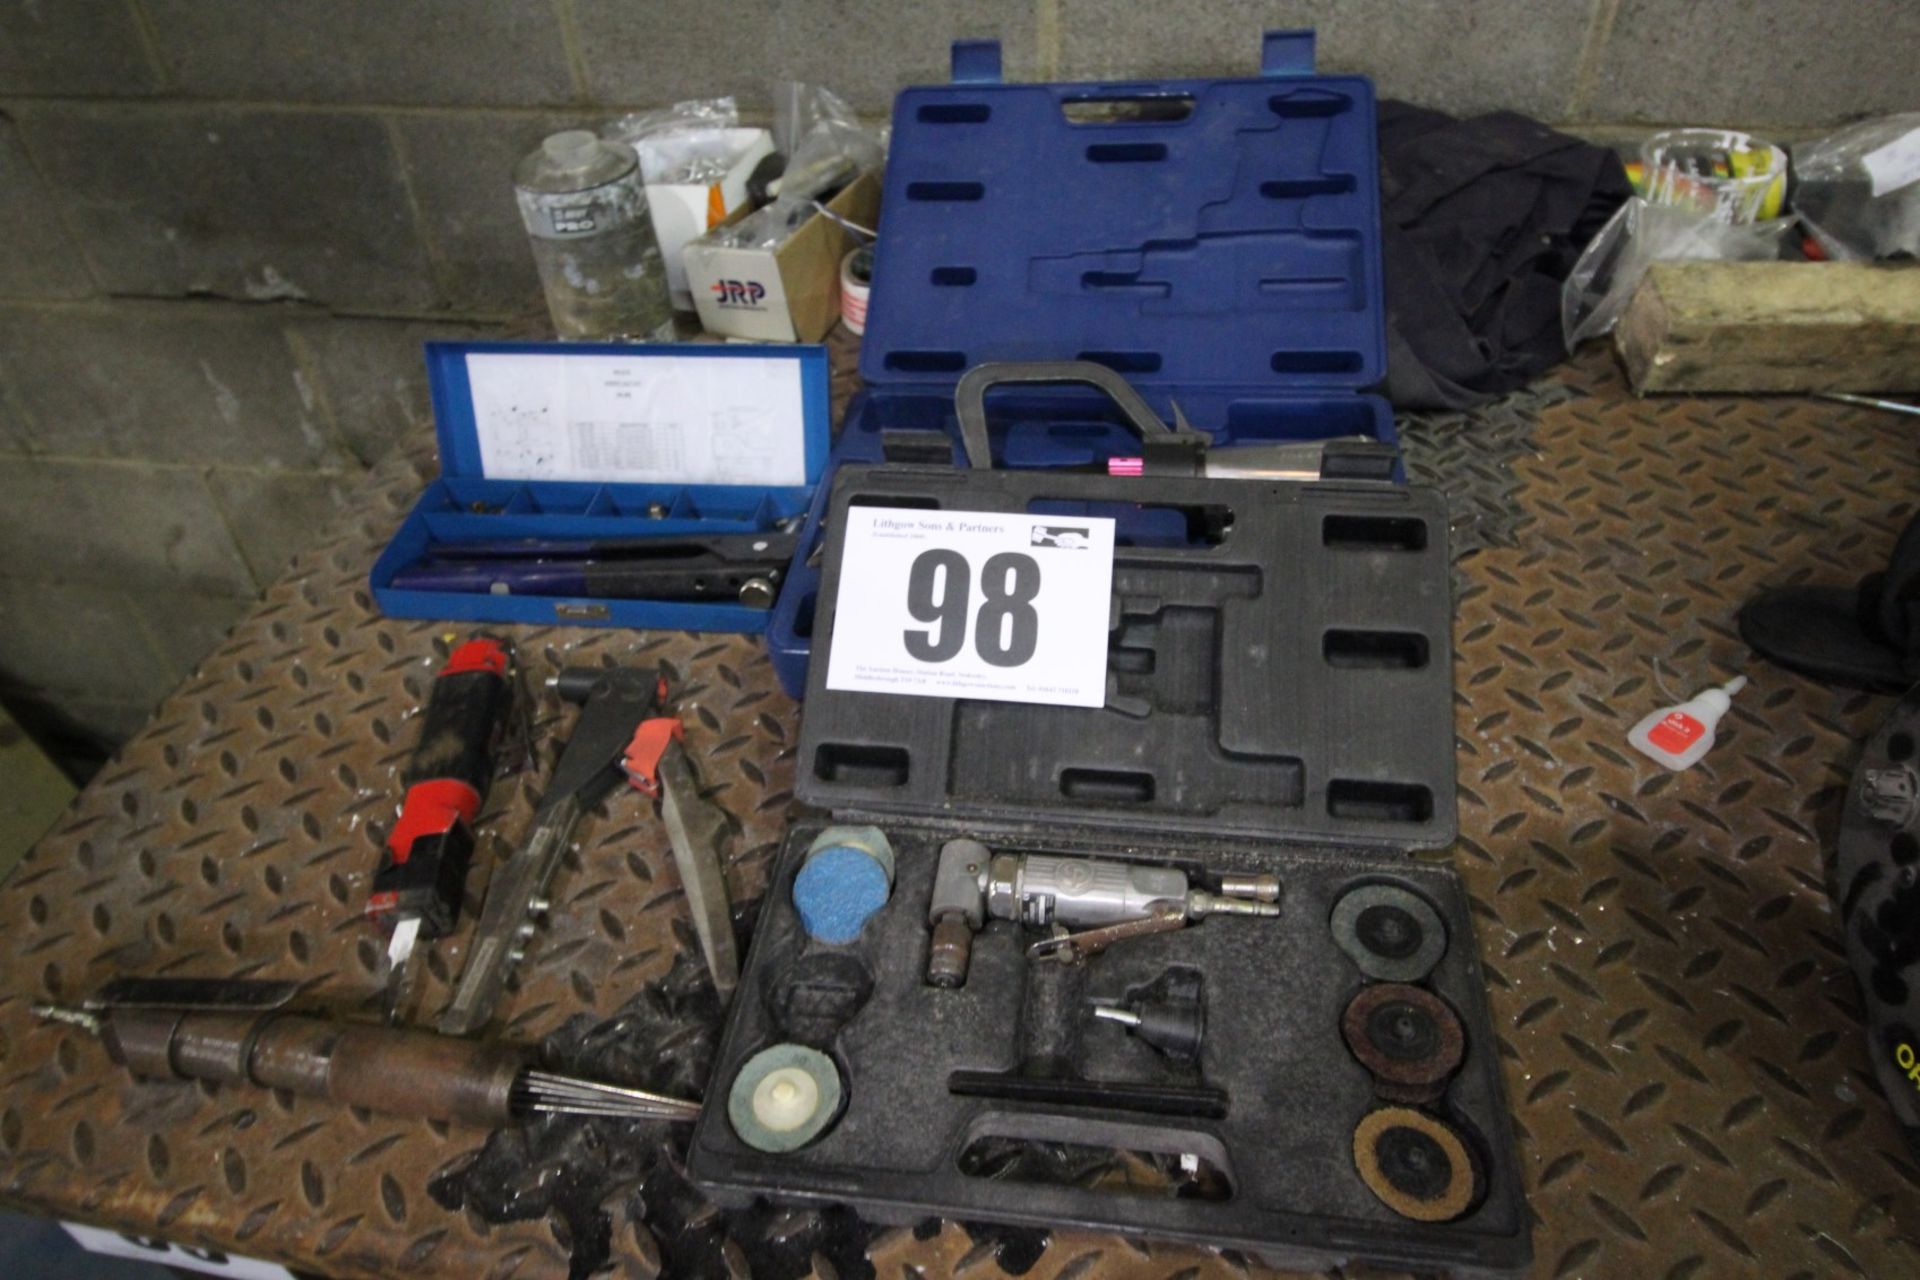 REMAINDER OF WORKBENCH, INCLUDING AIR-OPERATED MINI SANDING SET, AIR-OPERATED HOLE DRILLER, RIVET